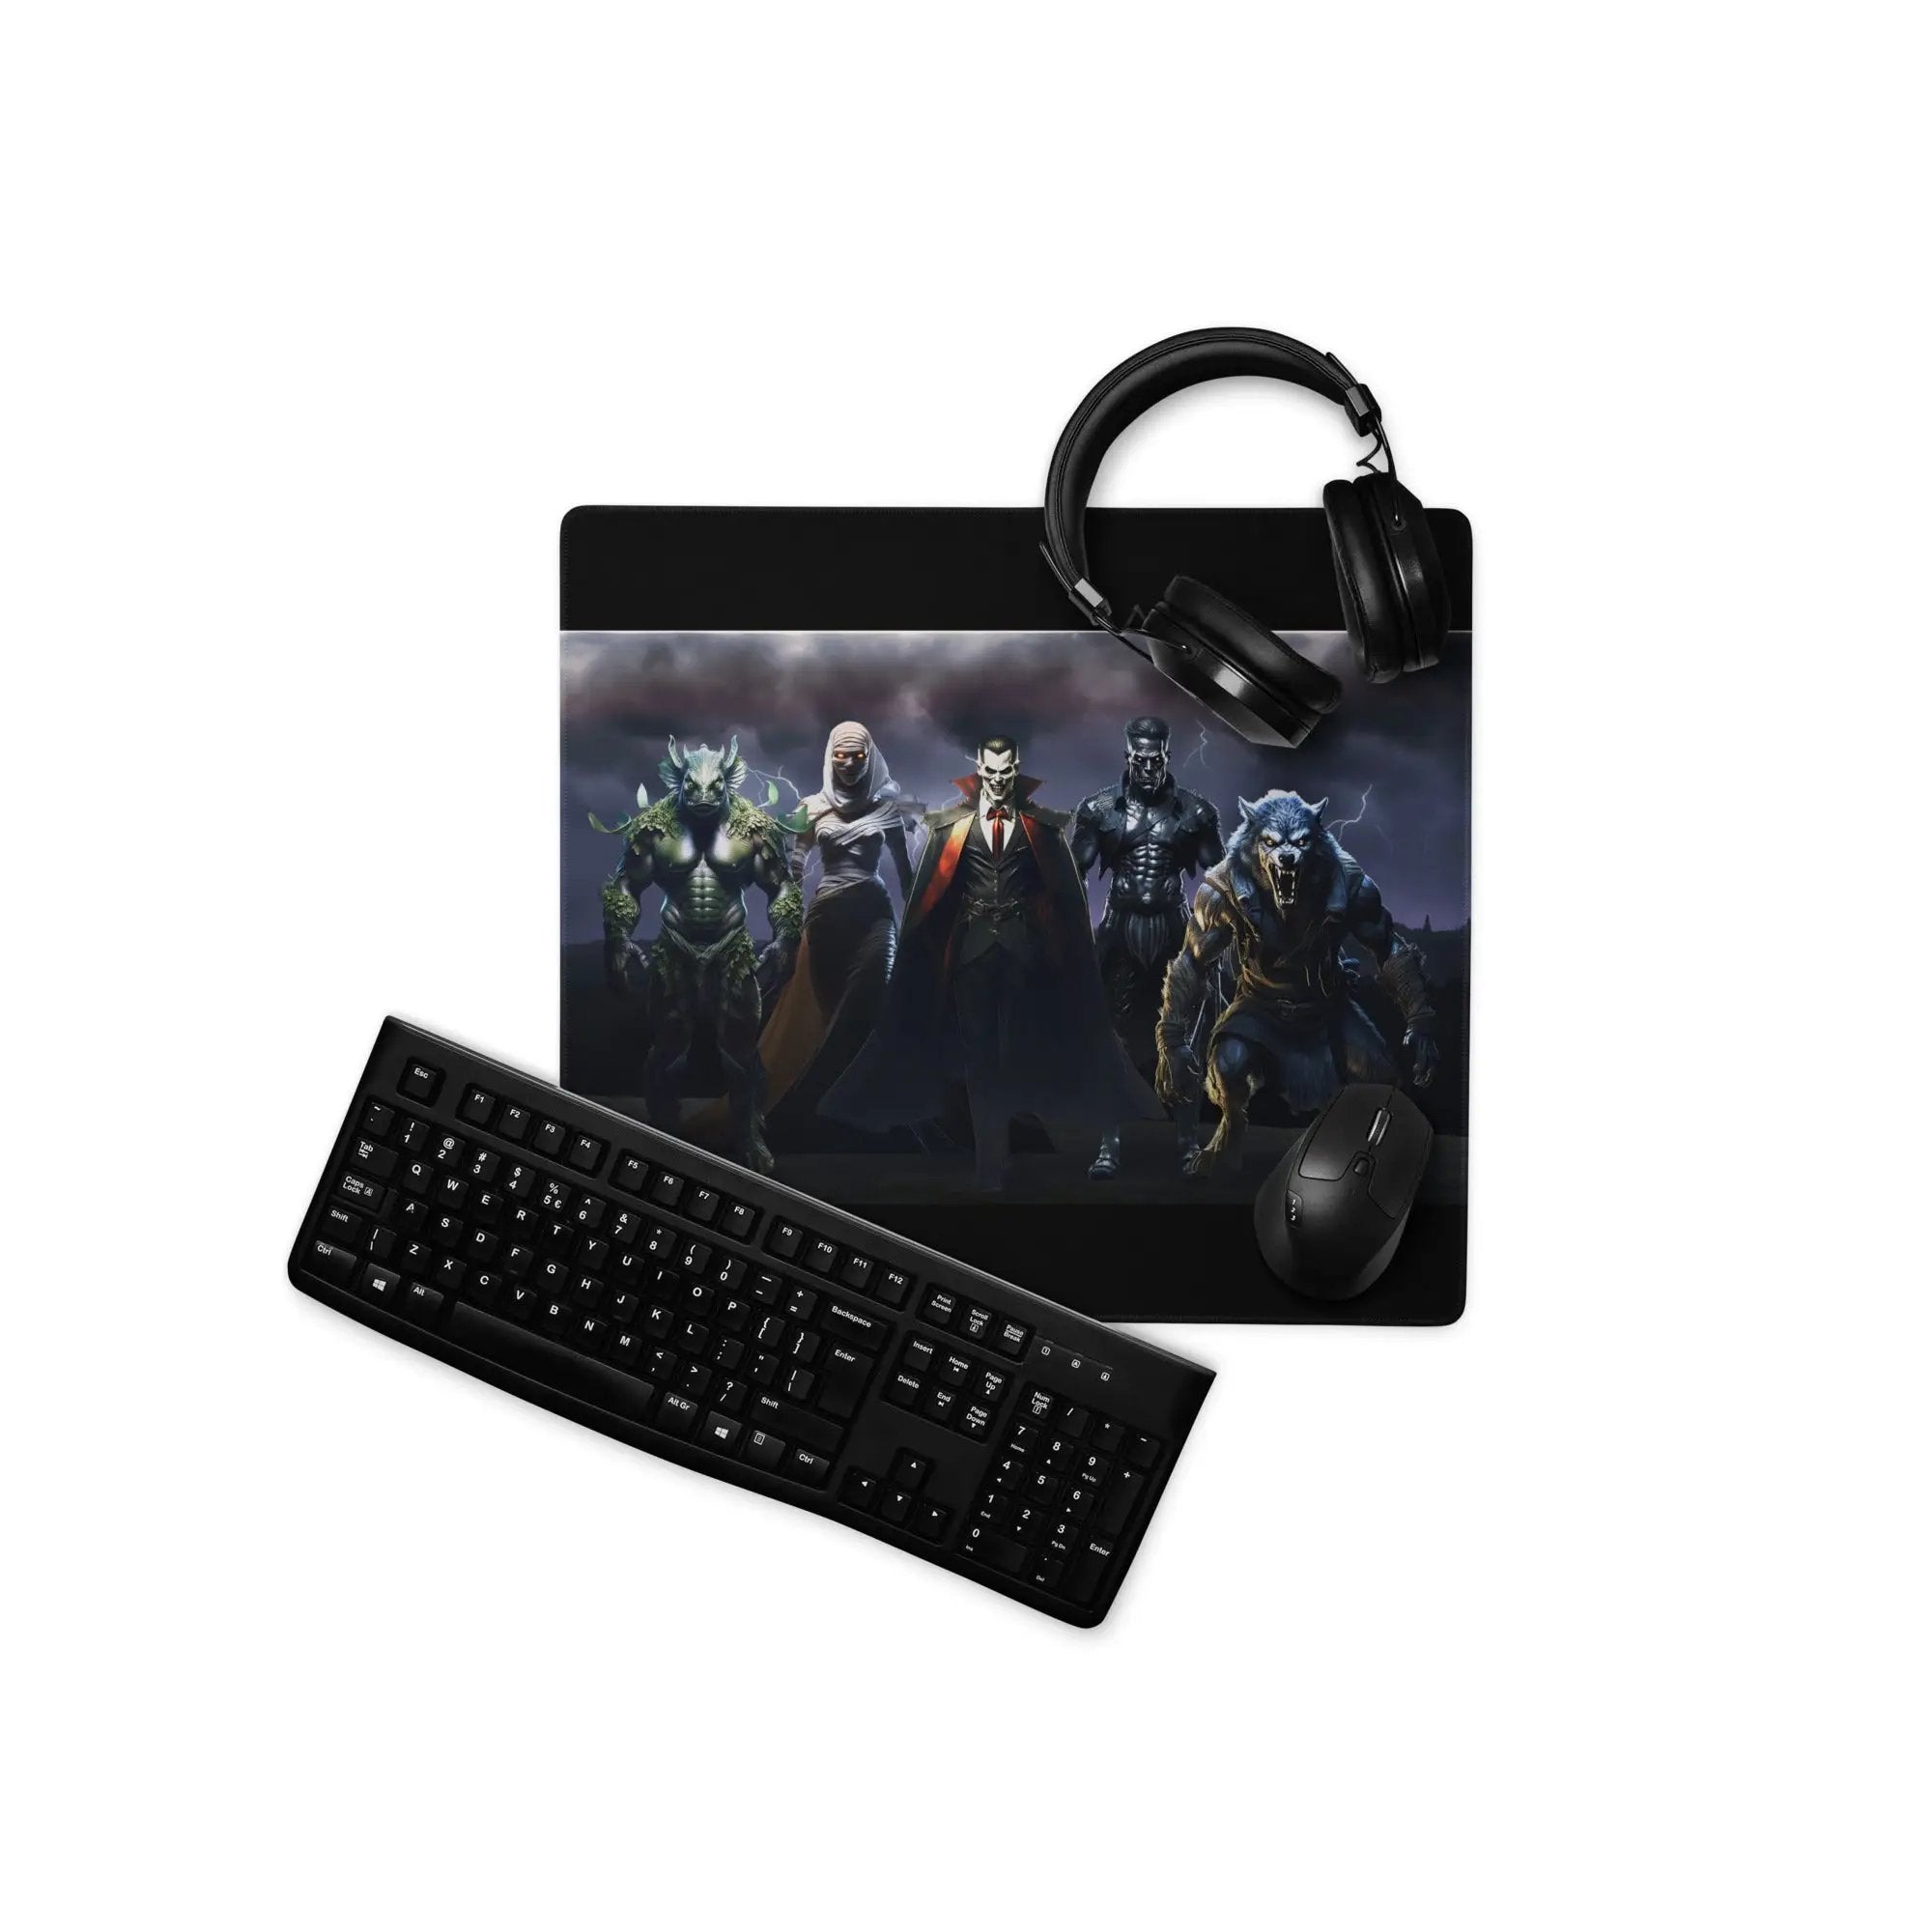 The Monster Squad Gaming mouse pad